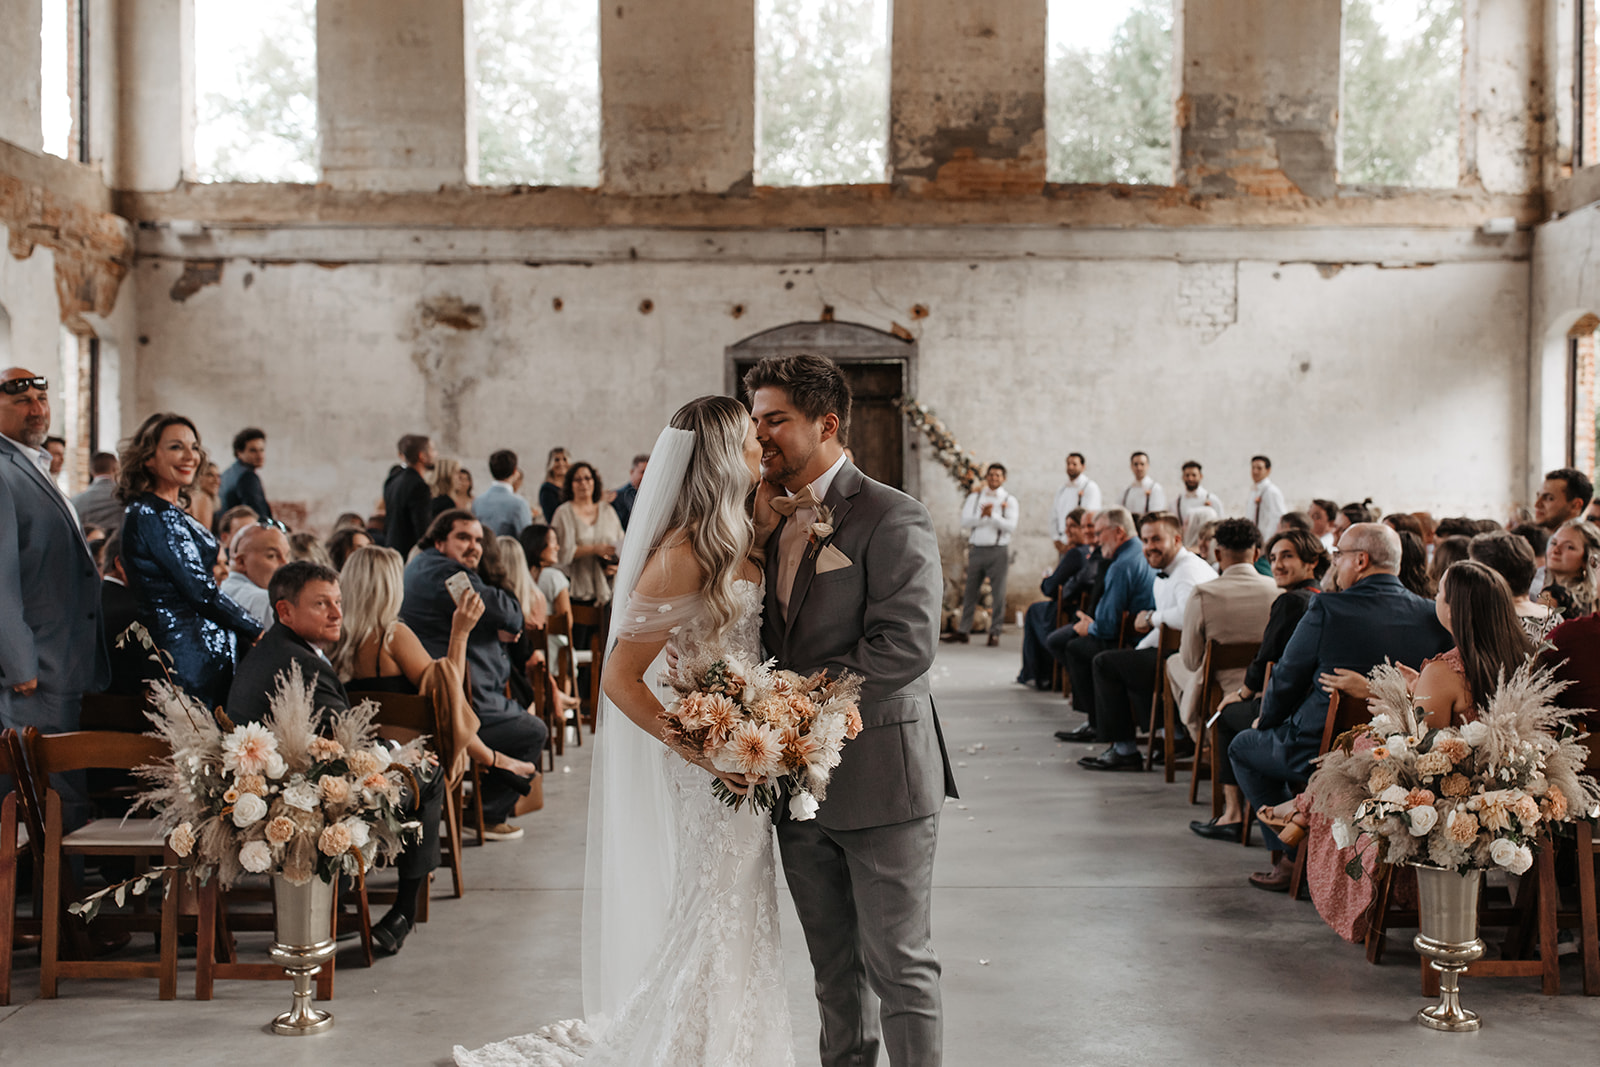 the couple kissing at the end of the aisle as husband and wife